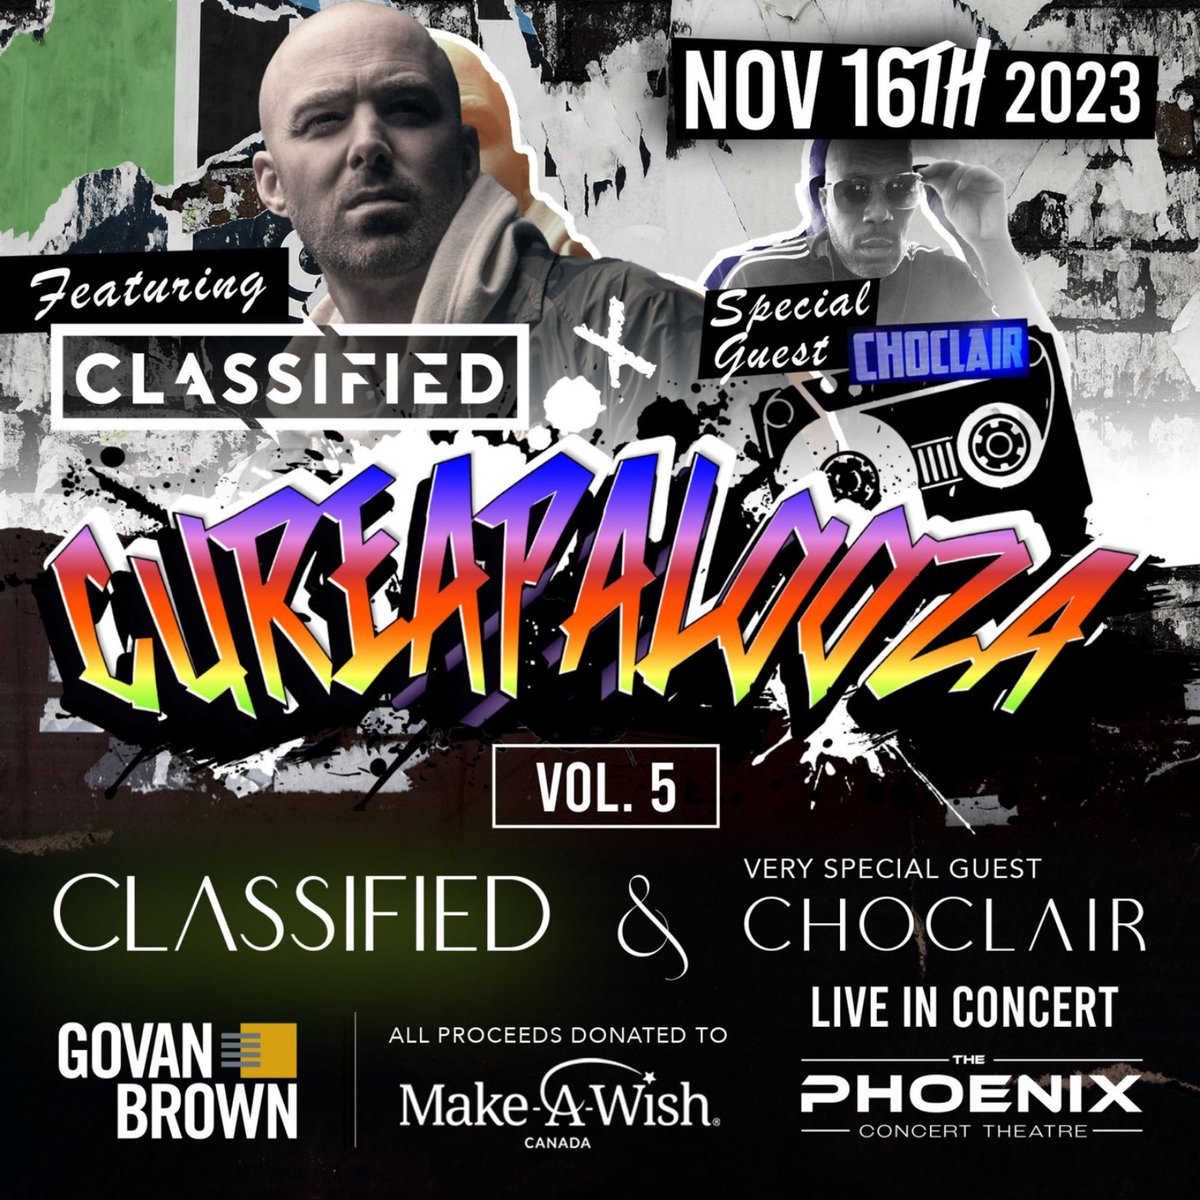 All of the contests currently running. Links in bio. Which one u tryin' to win?

Key Glock (ends Mon)
TSMF w/ DVSN, Glenn Lewis and Jully Black (ends Fri)
Eddie Griffin Contest (ends Thu)
Cureapalooza Charity Concert with Classified and Choclair (ends Wed)